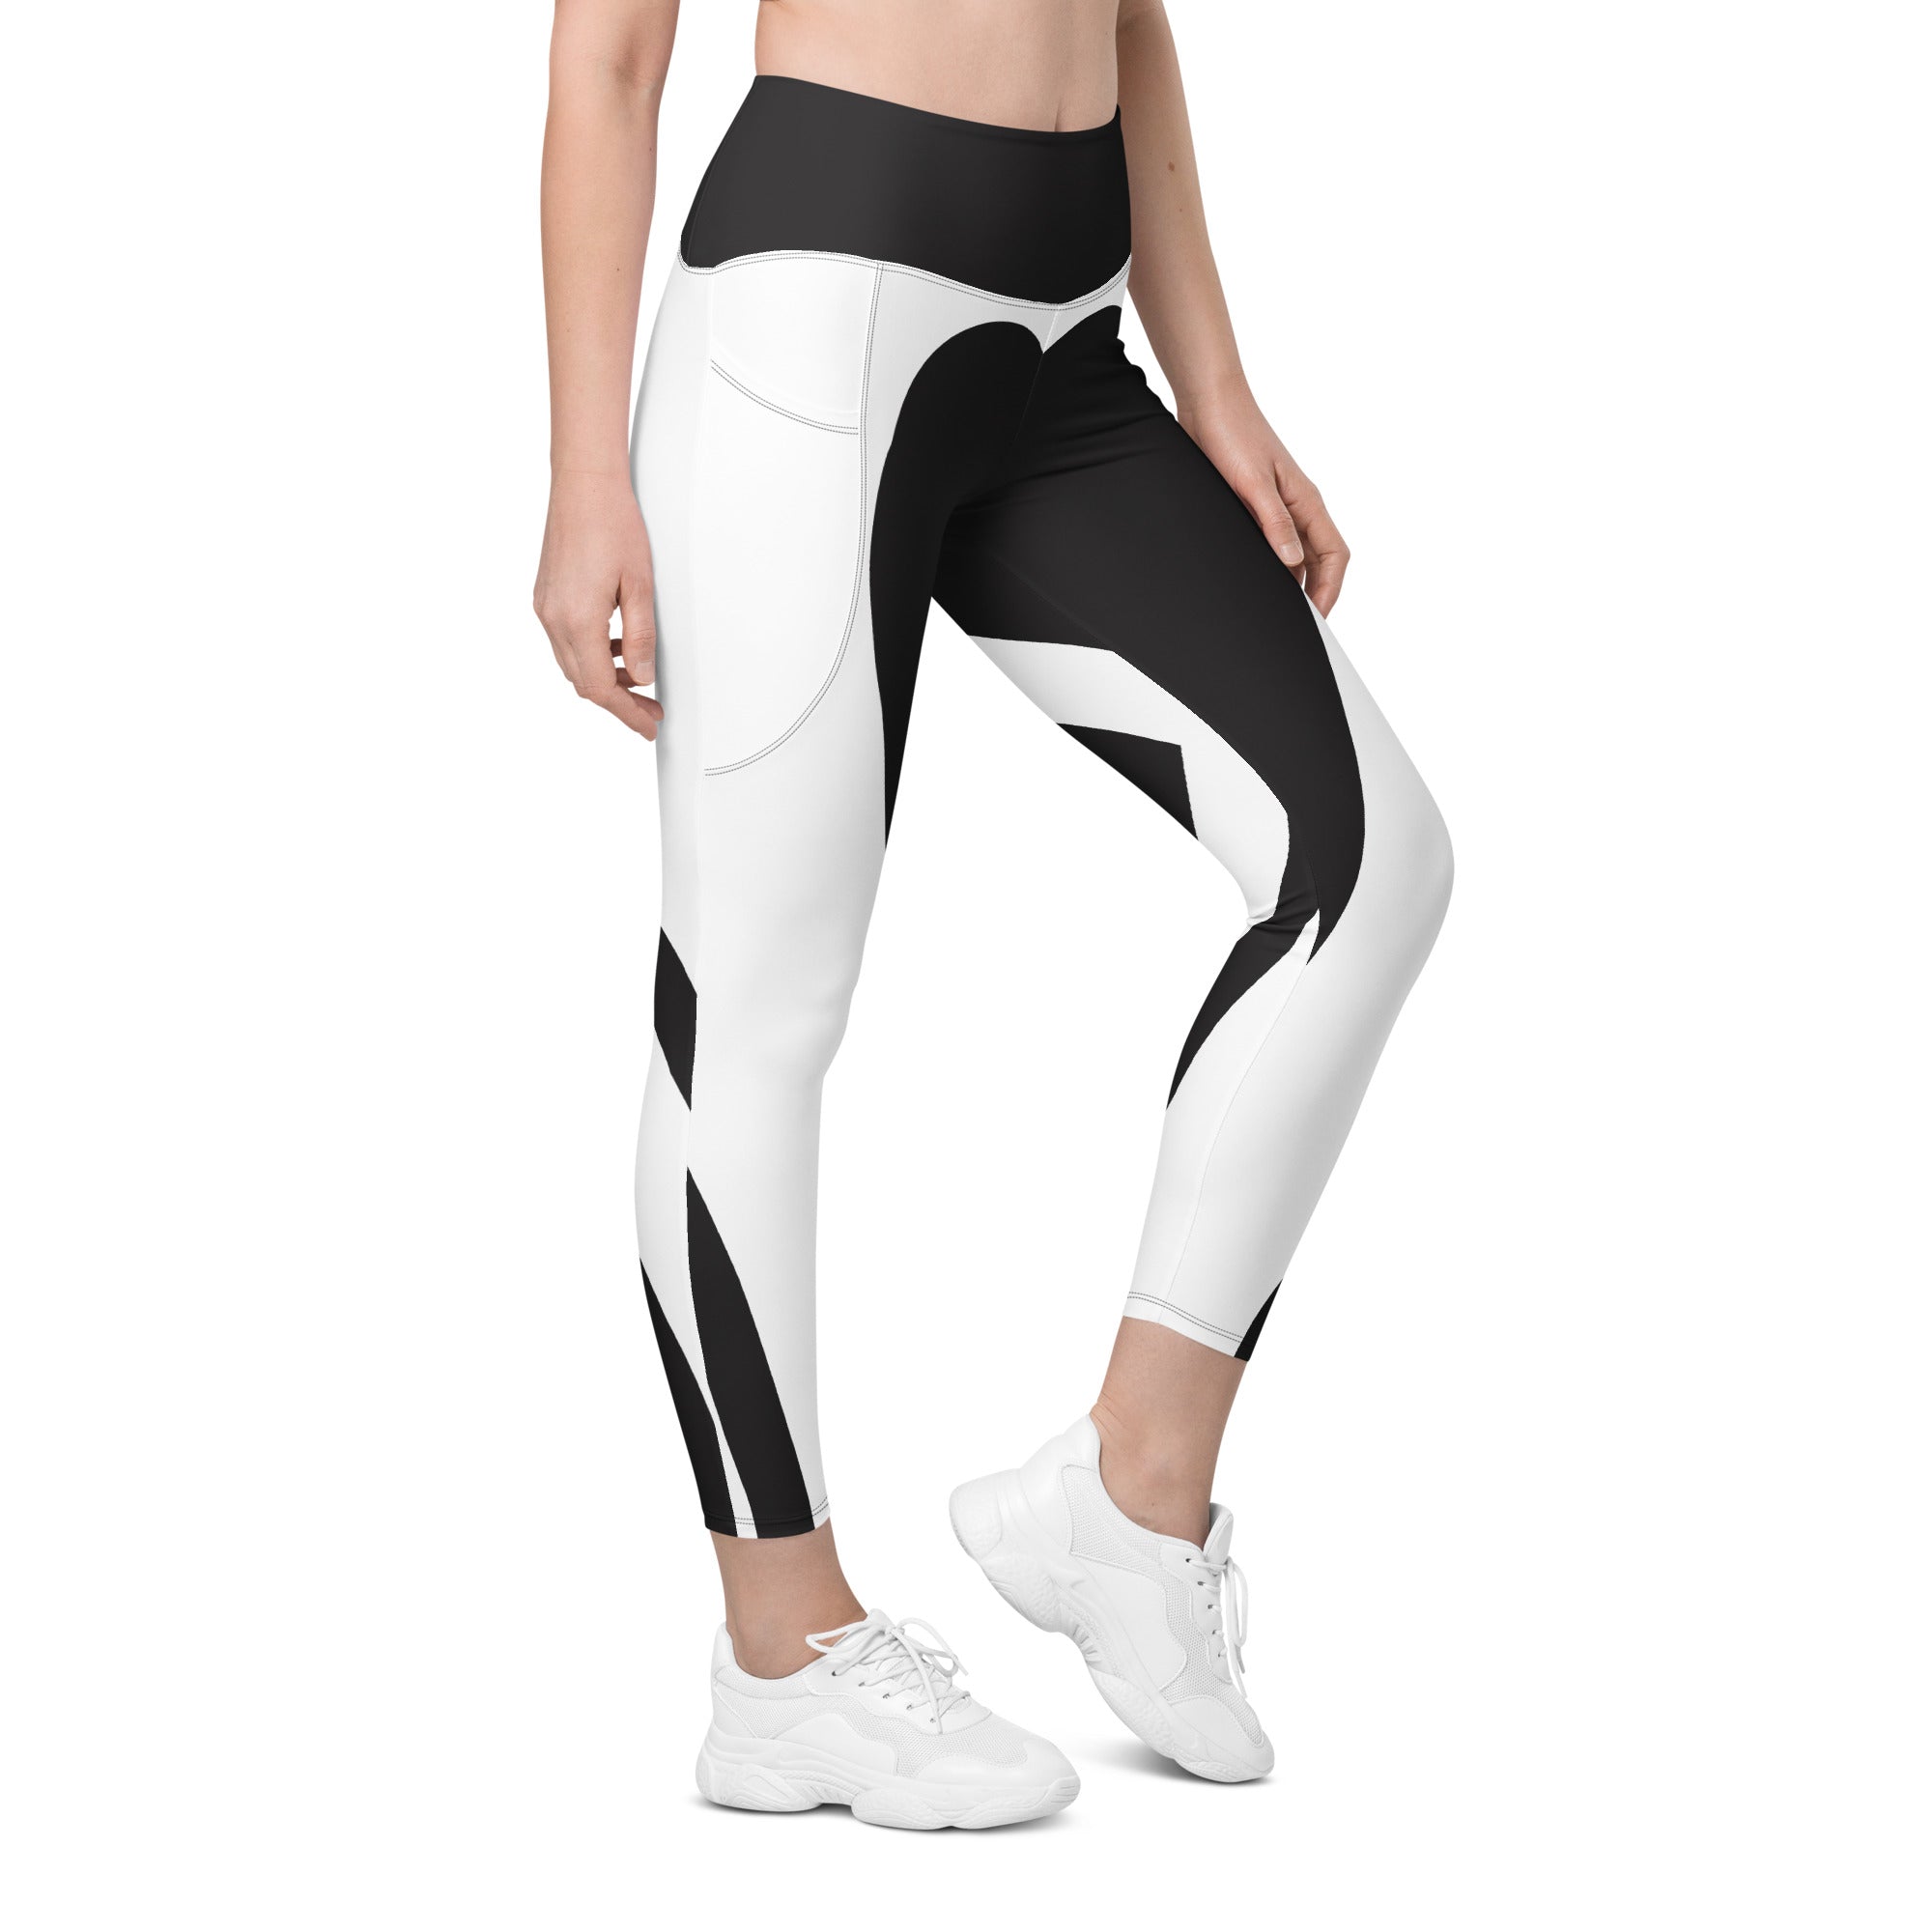 Charcoal Black & White Heart Shaped Leggings With Pockets